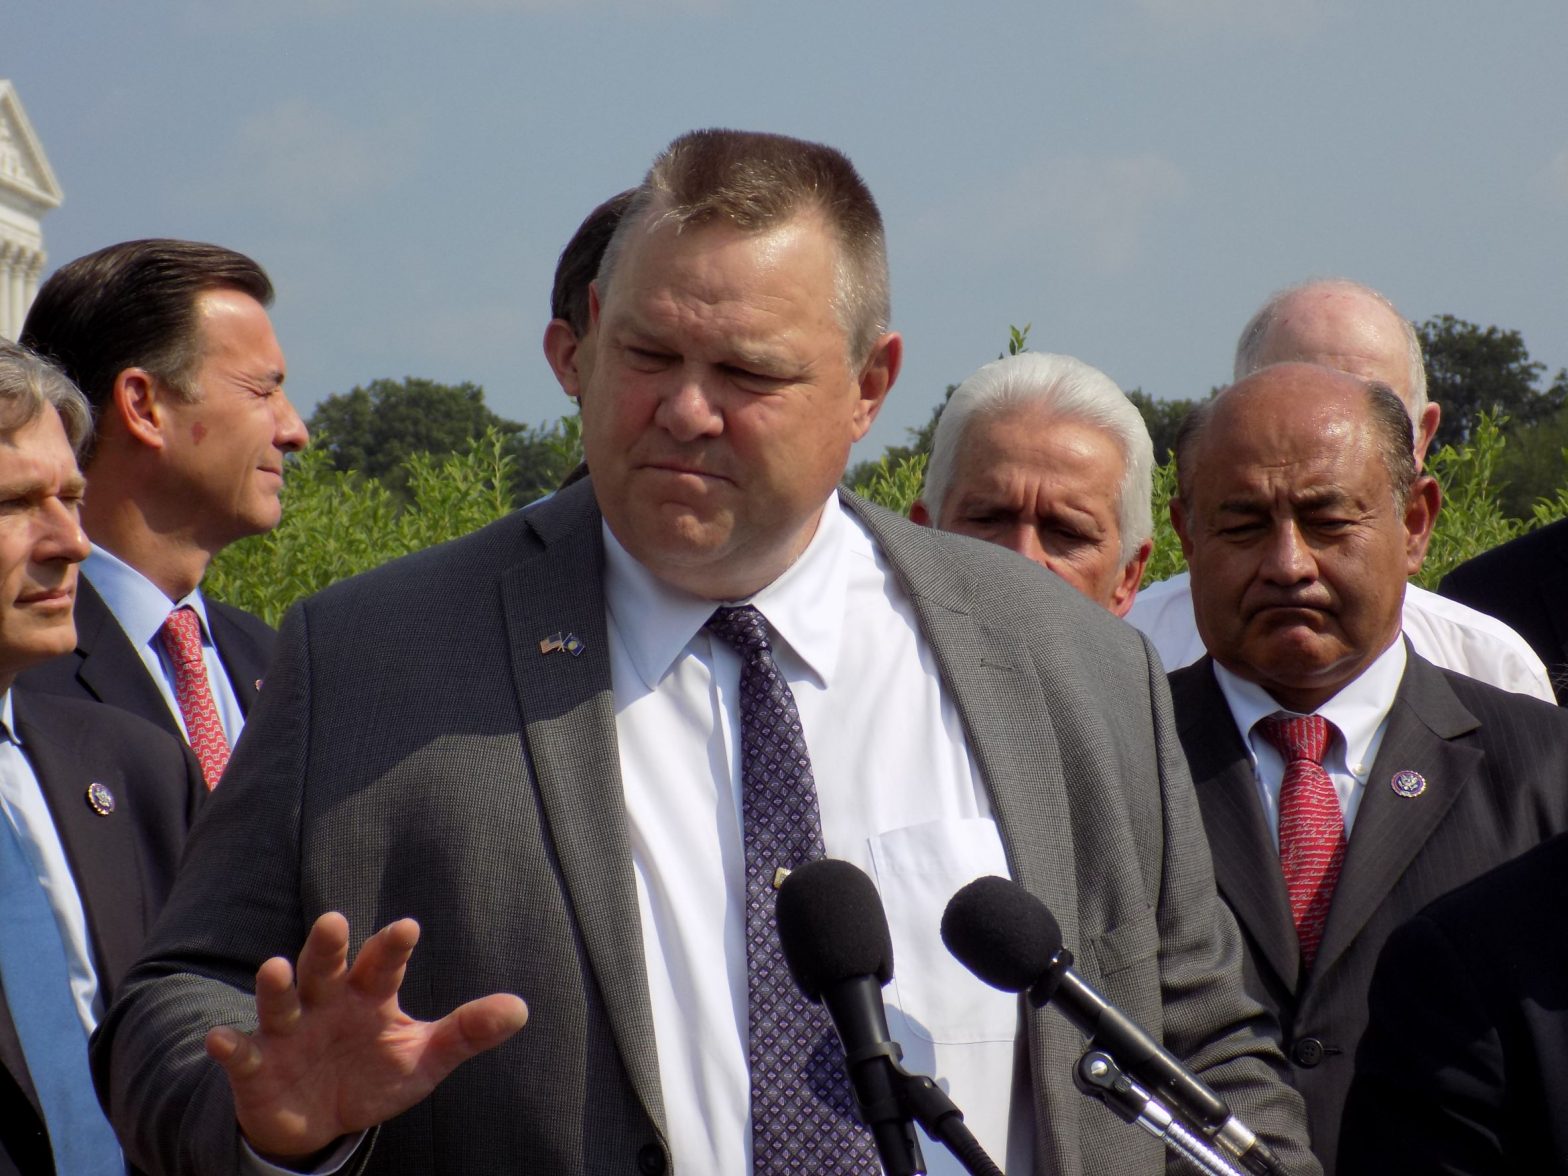 Tester to Run for Reelection in 2024